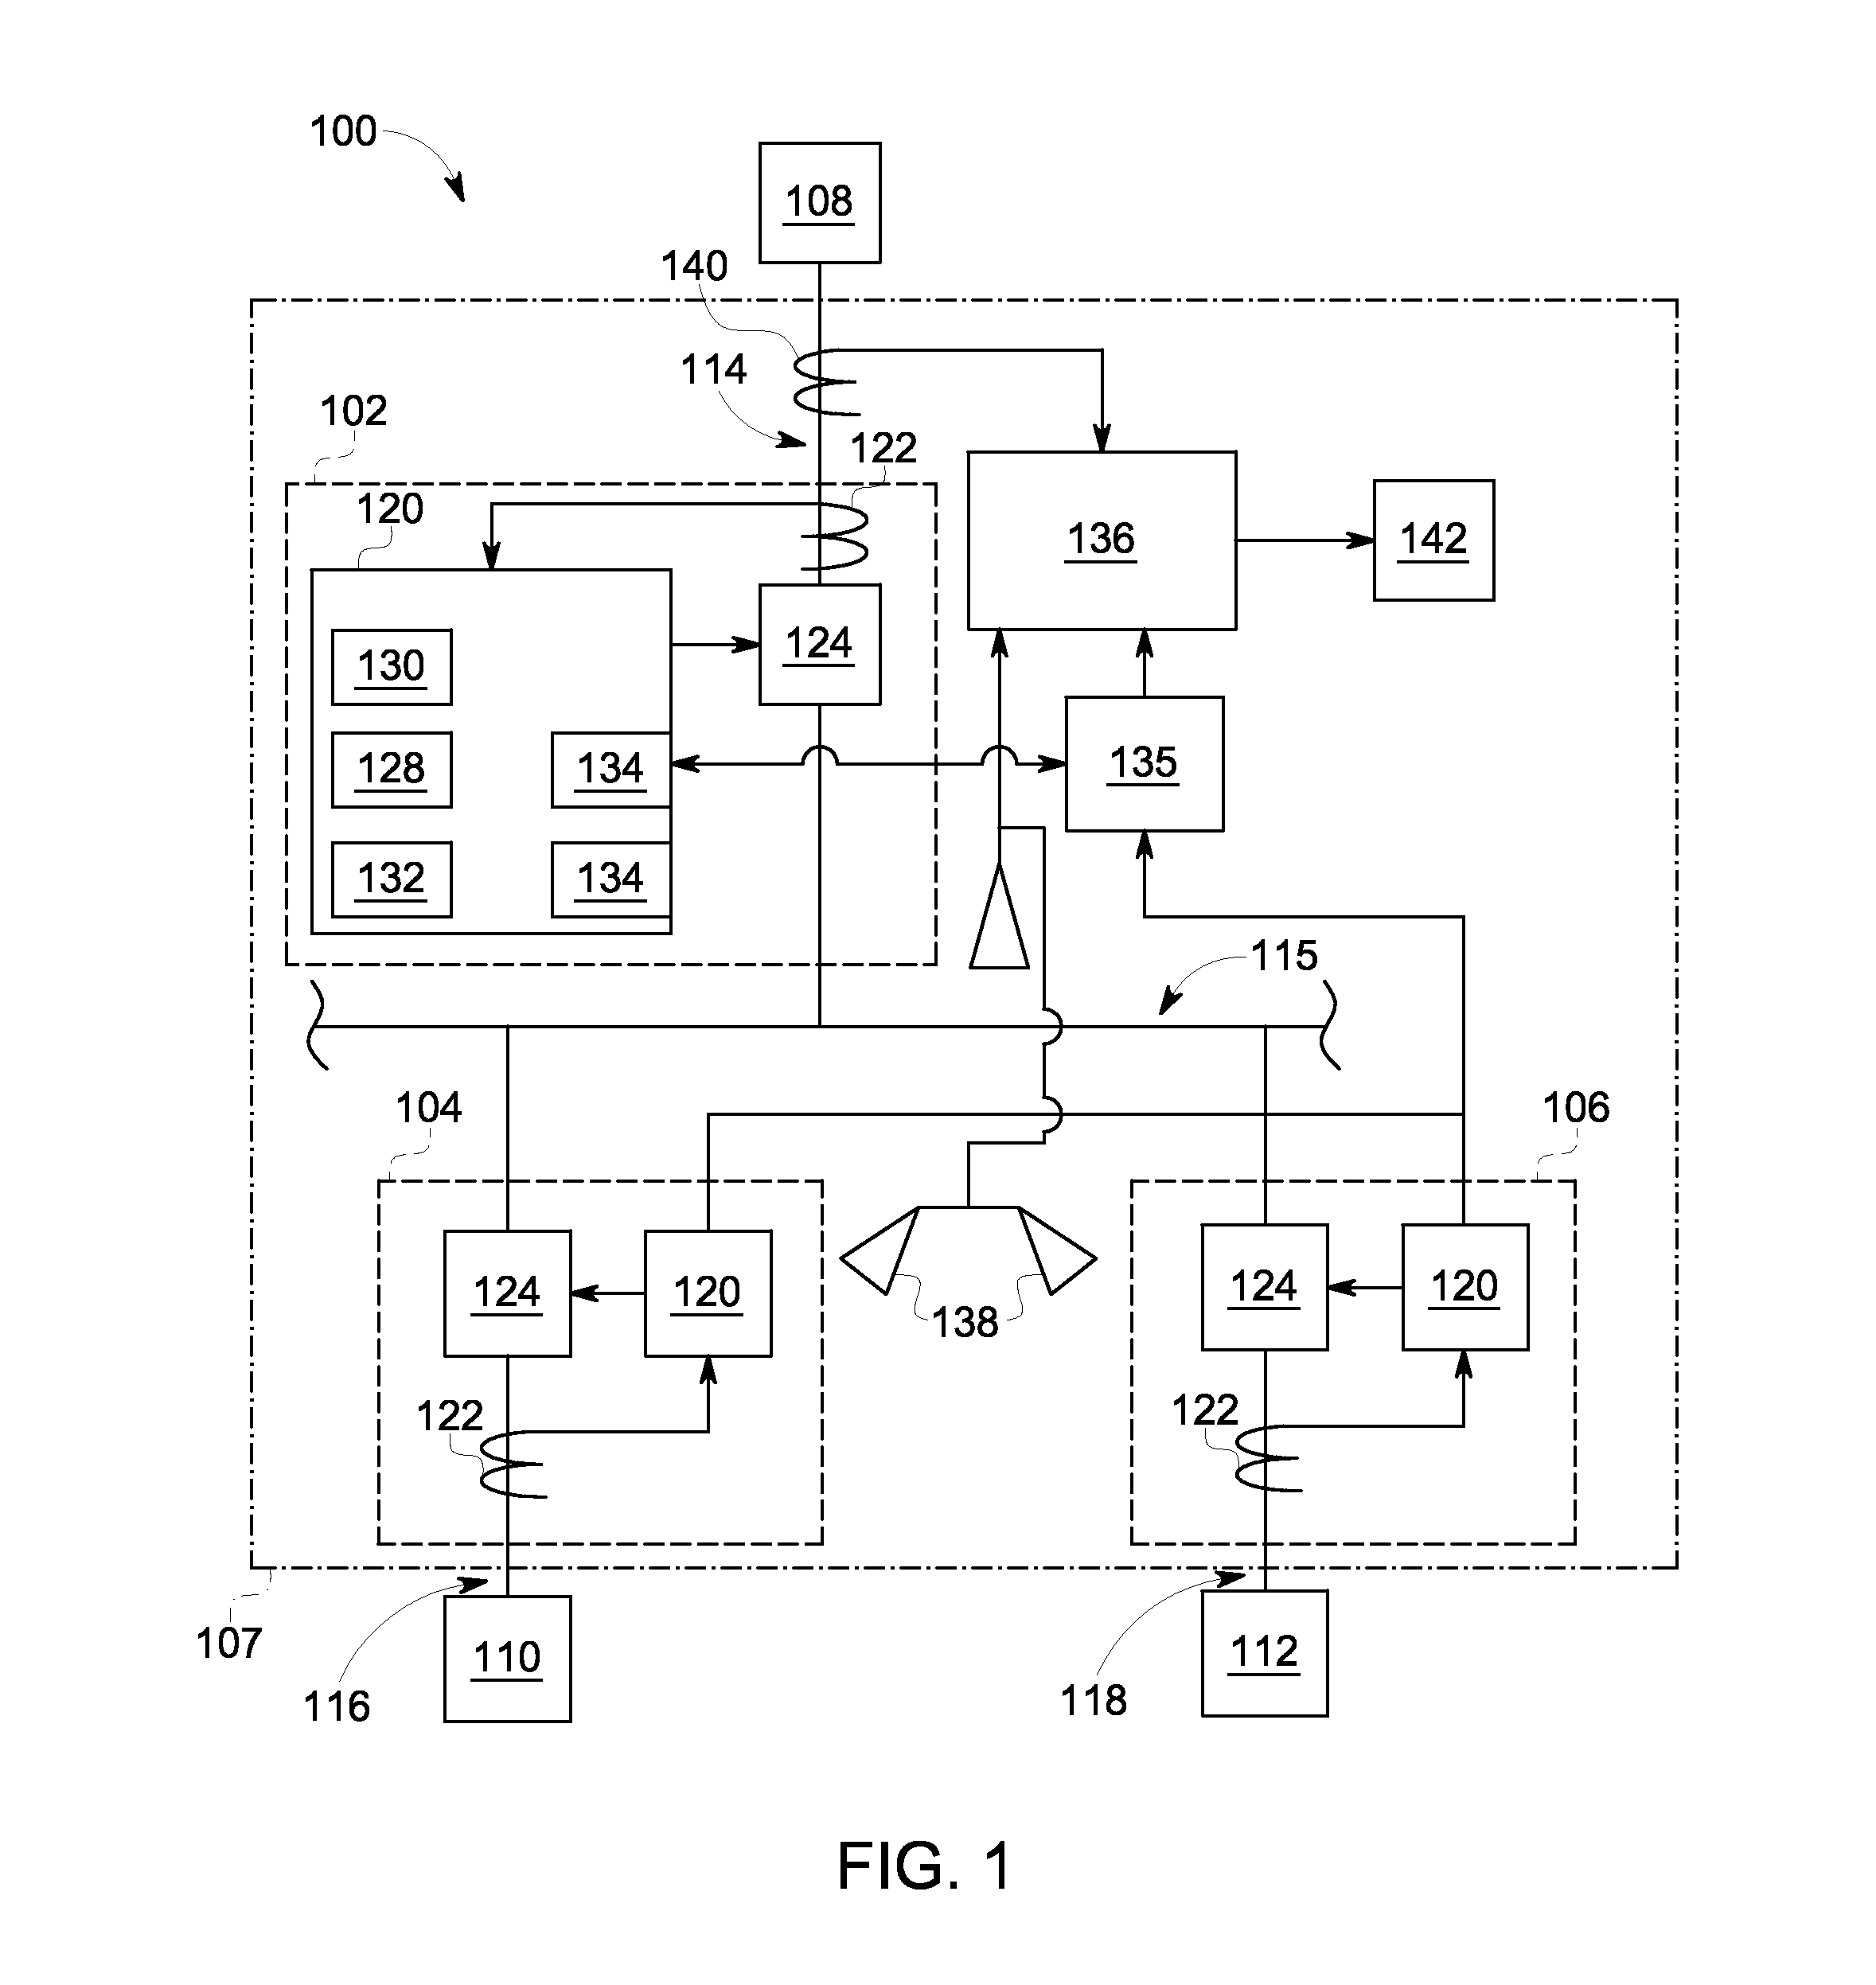 Power distribution systems and methods of operating a power distribution system including arc flash detection